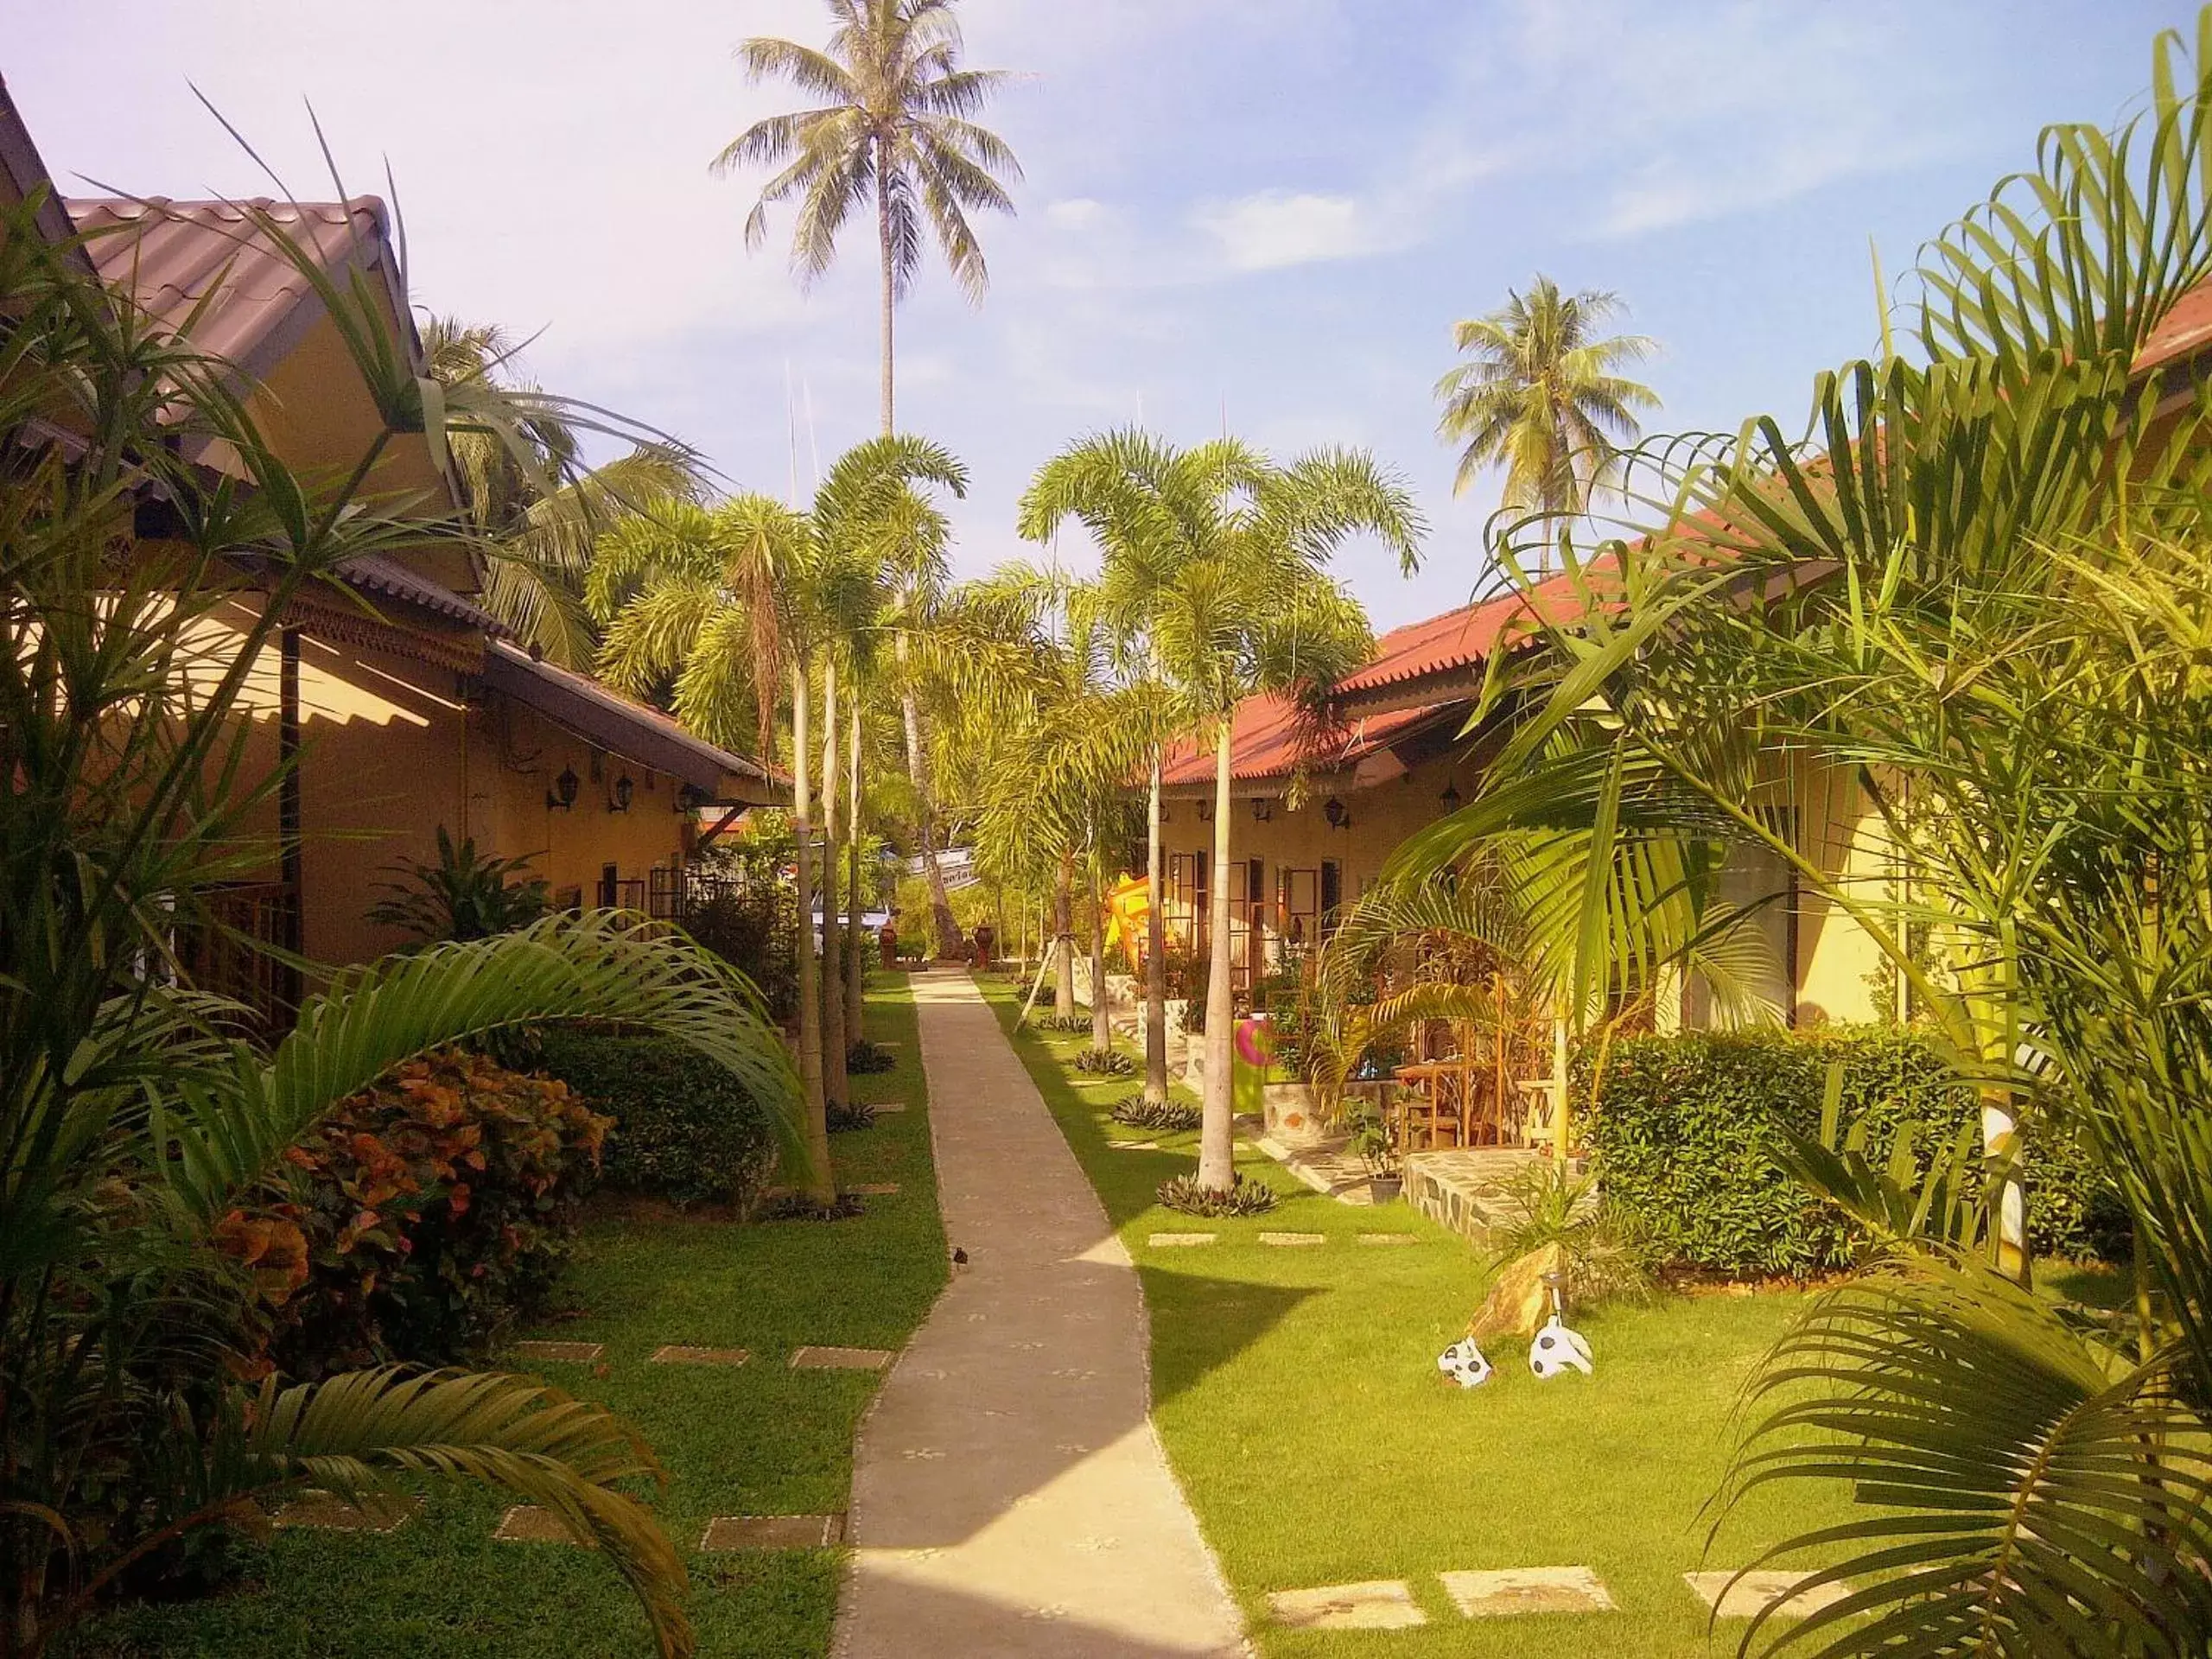 Property Building in Paradise Bungalows